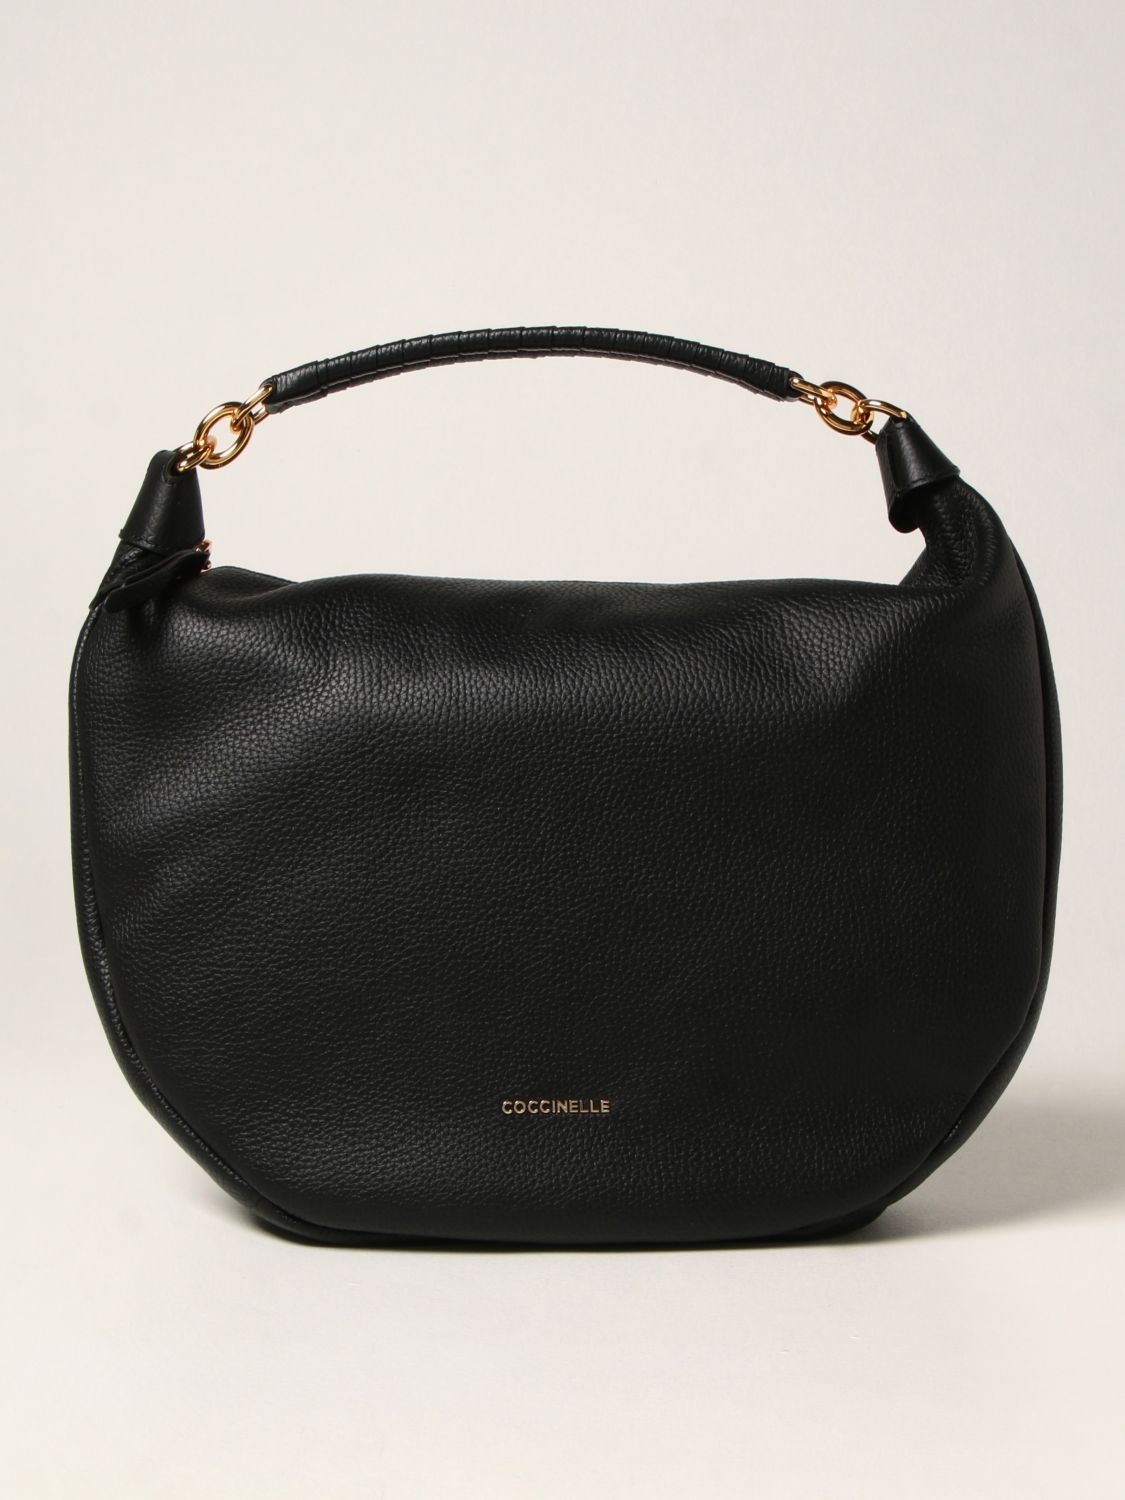 Coccinelle Maelody Bag In Grained Leather In Black | ModeSens